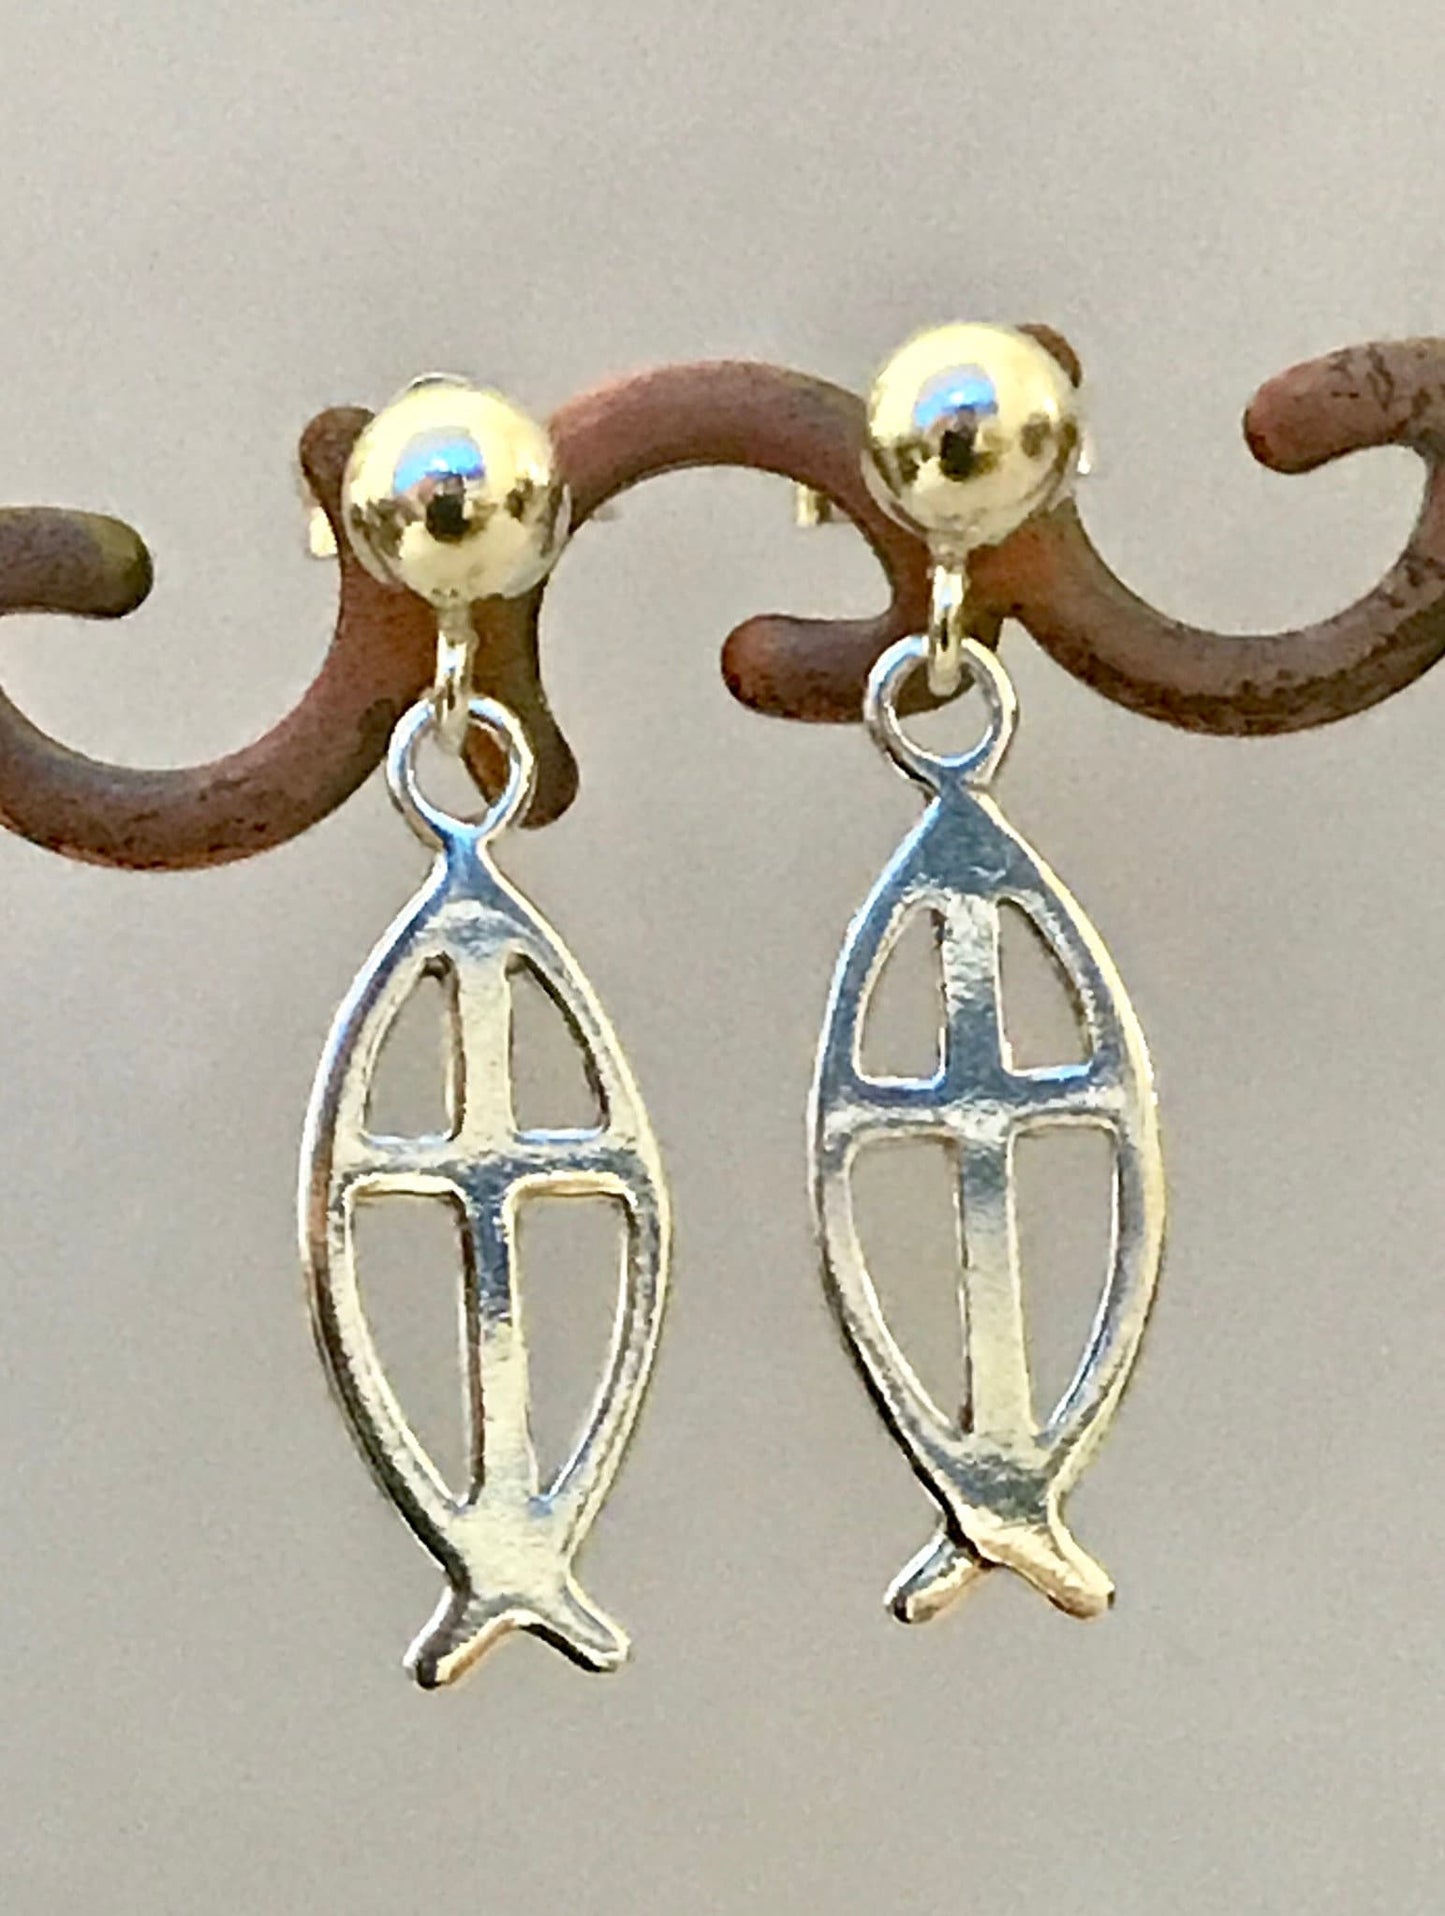 Sterling Silver Ichthys Christian Fish Earrings,Christian Symbol Earrings,Ichthys Earrings,Fish (Ichthus) Dangle Earrings,Cross Earrings